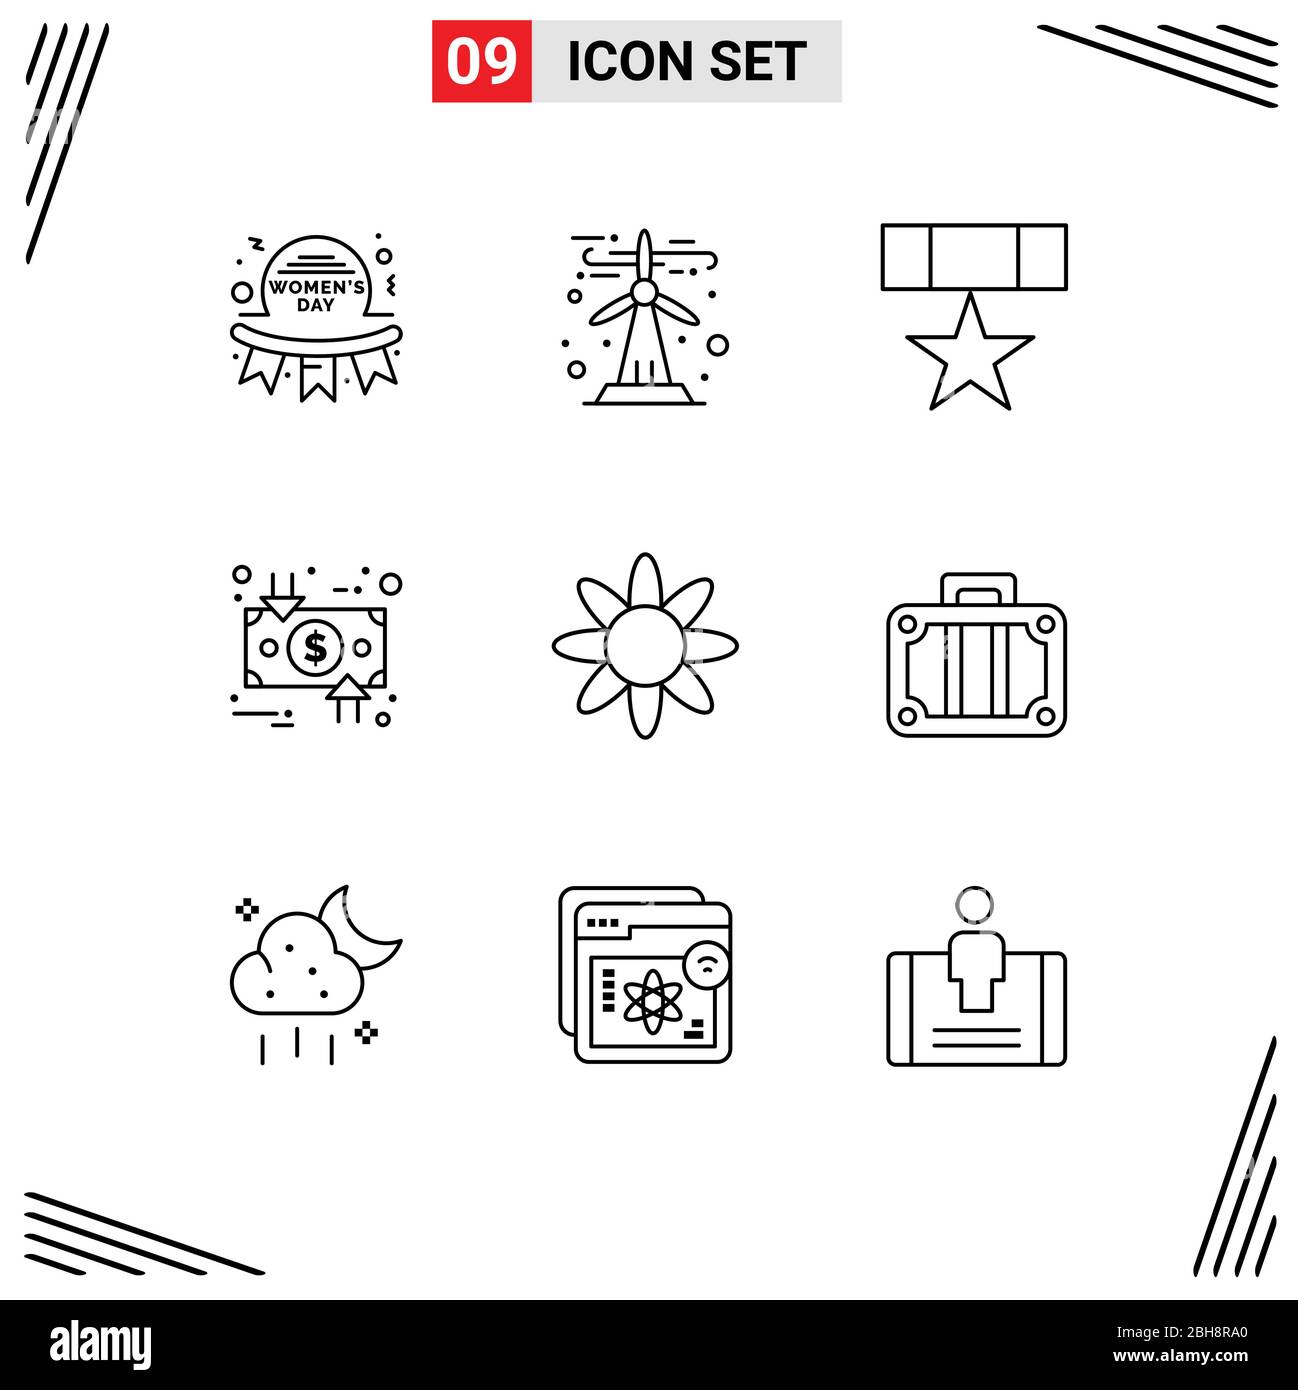 Outline Pack of 9 Universal Symbols of dollar, circulation, sustainable, charge, military Editable Vector Design Elements Stock Vector